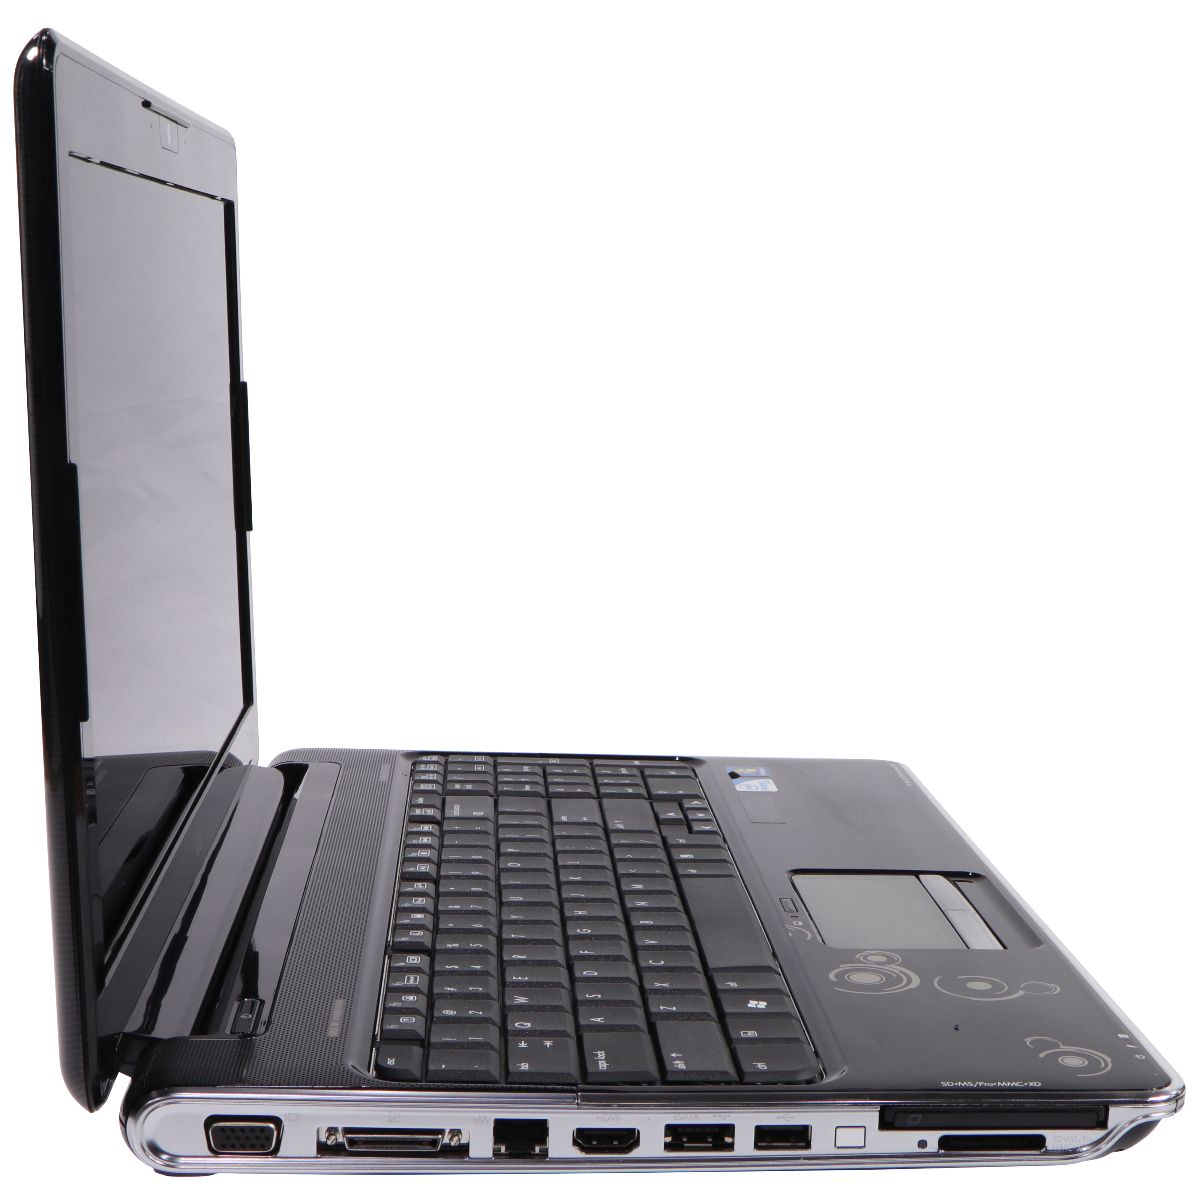 HP Pavilion (15.6-in) Laptop (DV6-1334US) Pentium T4300/250GB HDD/4GB/10 Home Laptops - PC Laptops & Netbooks HP    - Simple Cell Bulk Wholesale Pricing - USA Seller